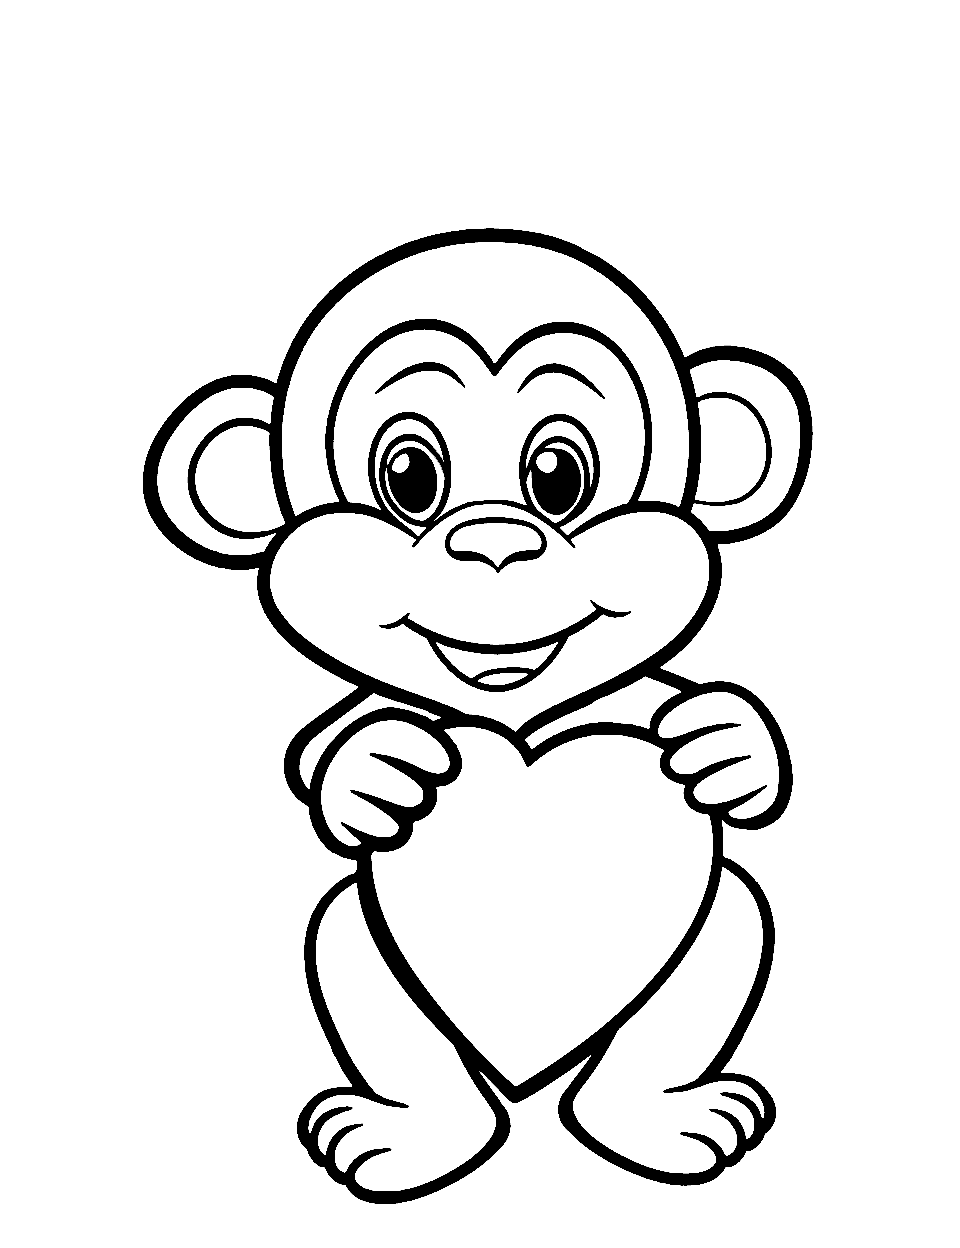 Monkey with a Heart Coloring Page - A monkey holding a heart with a big grin on his face.